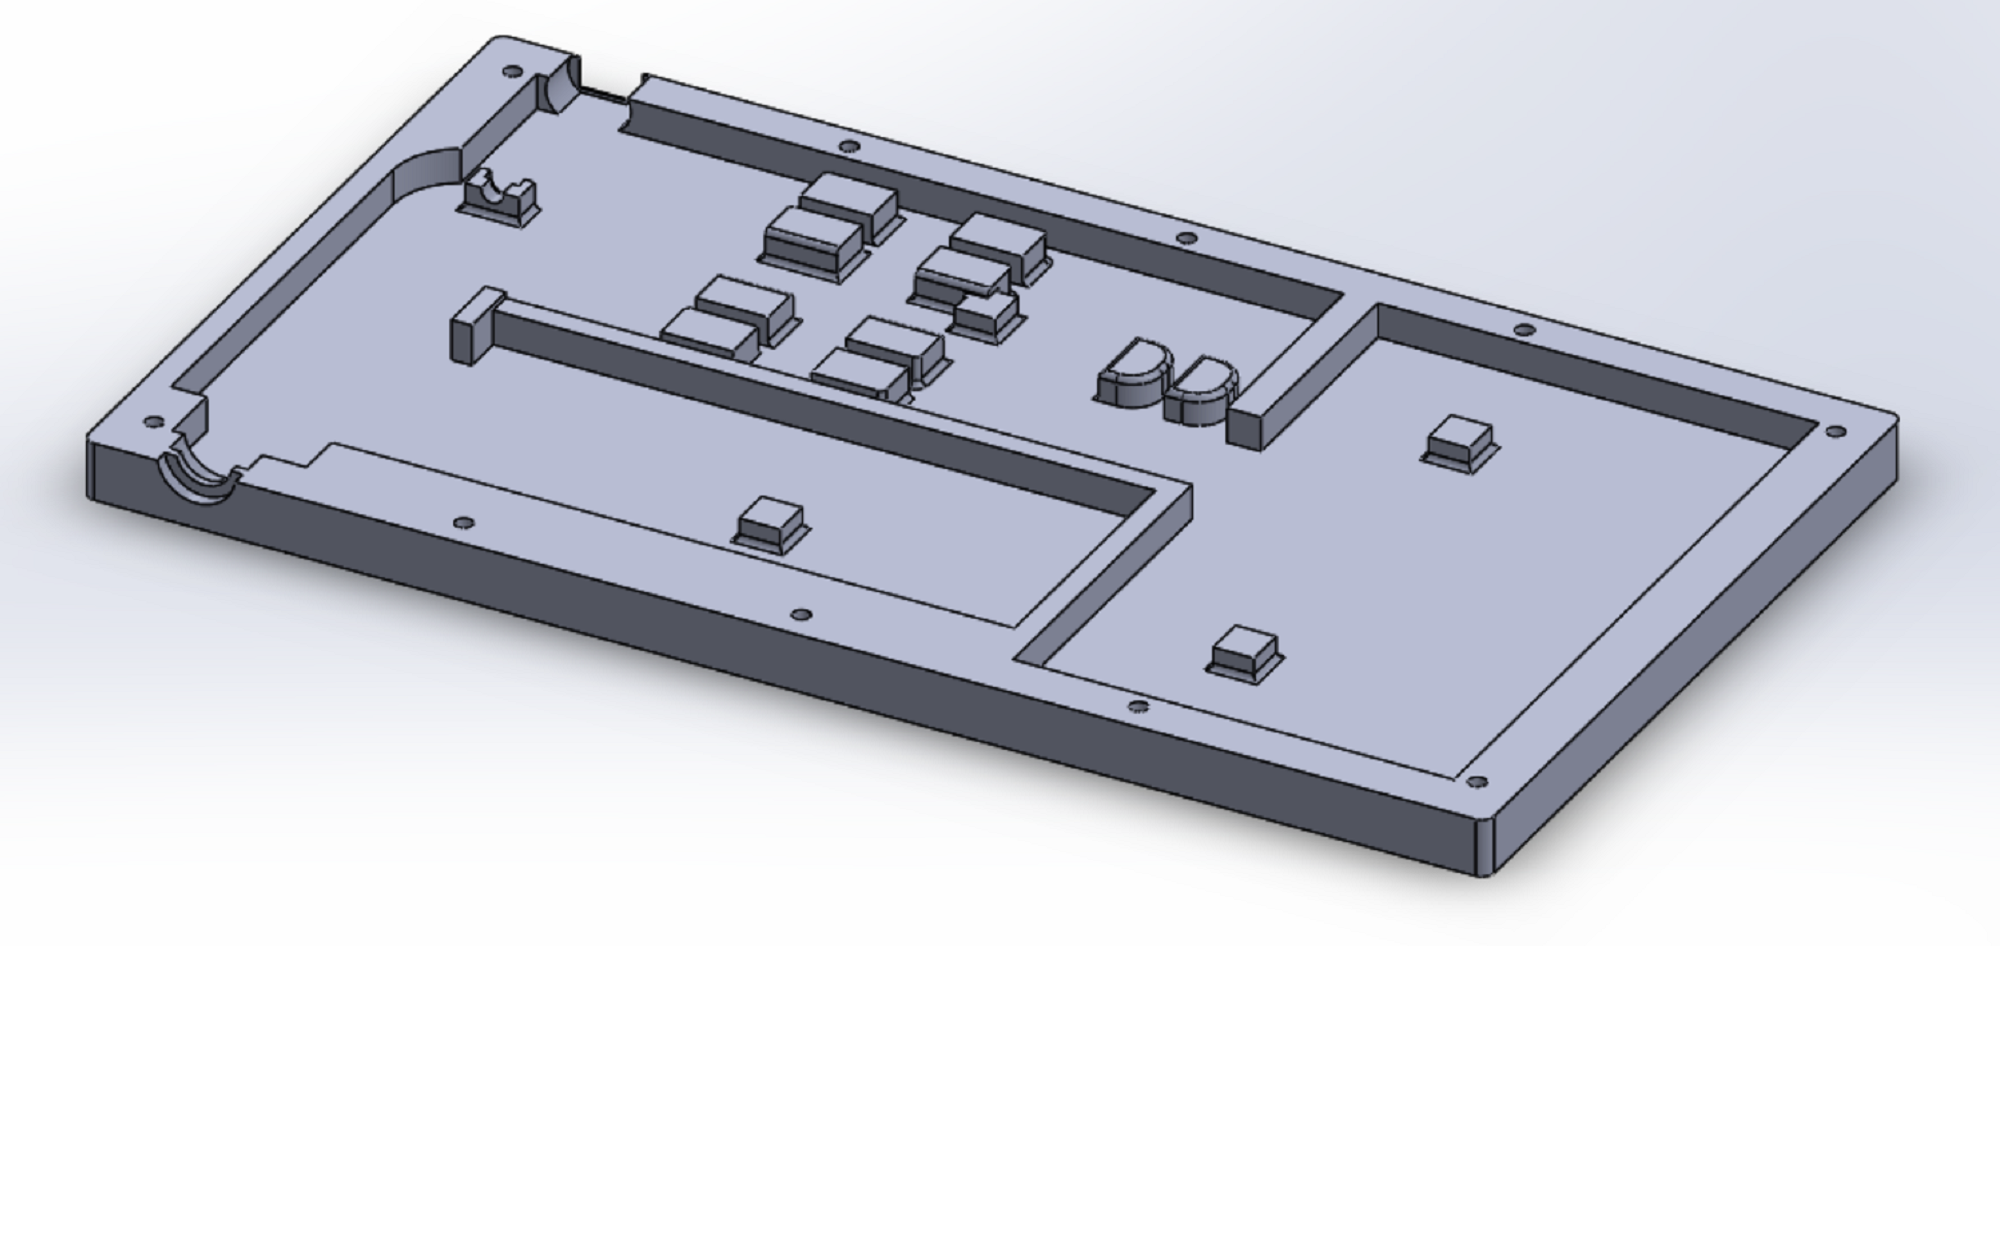 a 3d model of a touchscreen case seen from the inside.